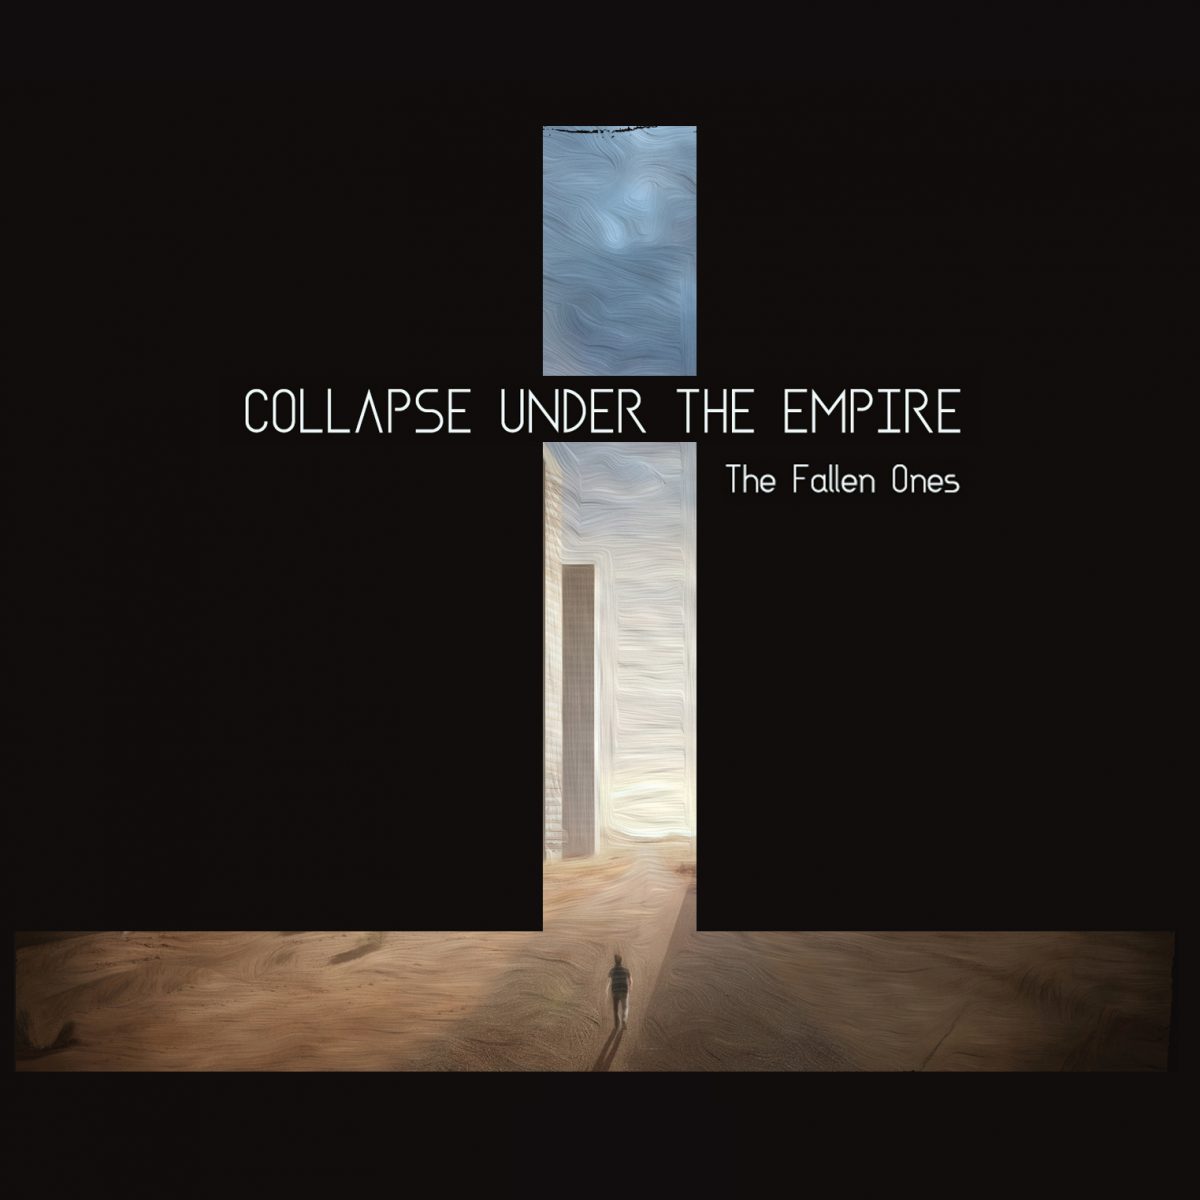 Collapse Under The Empire